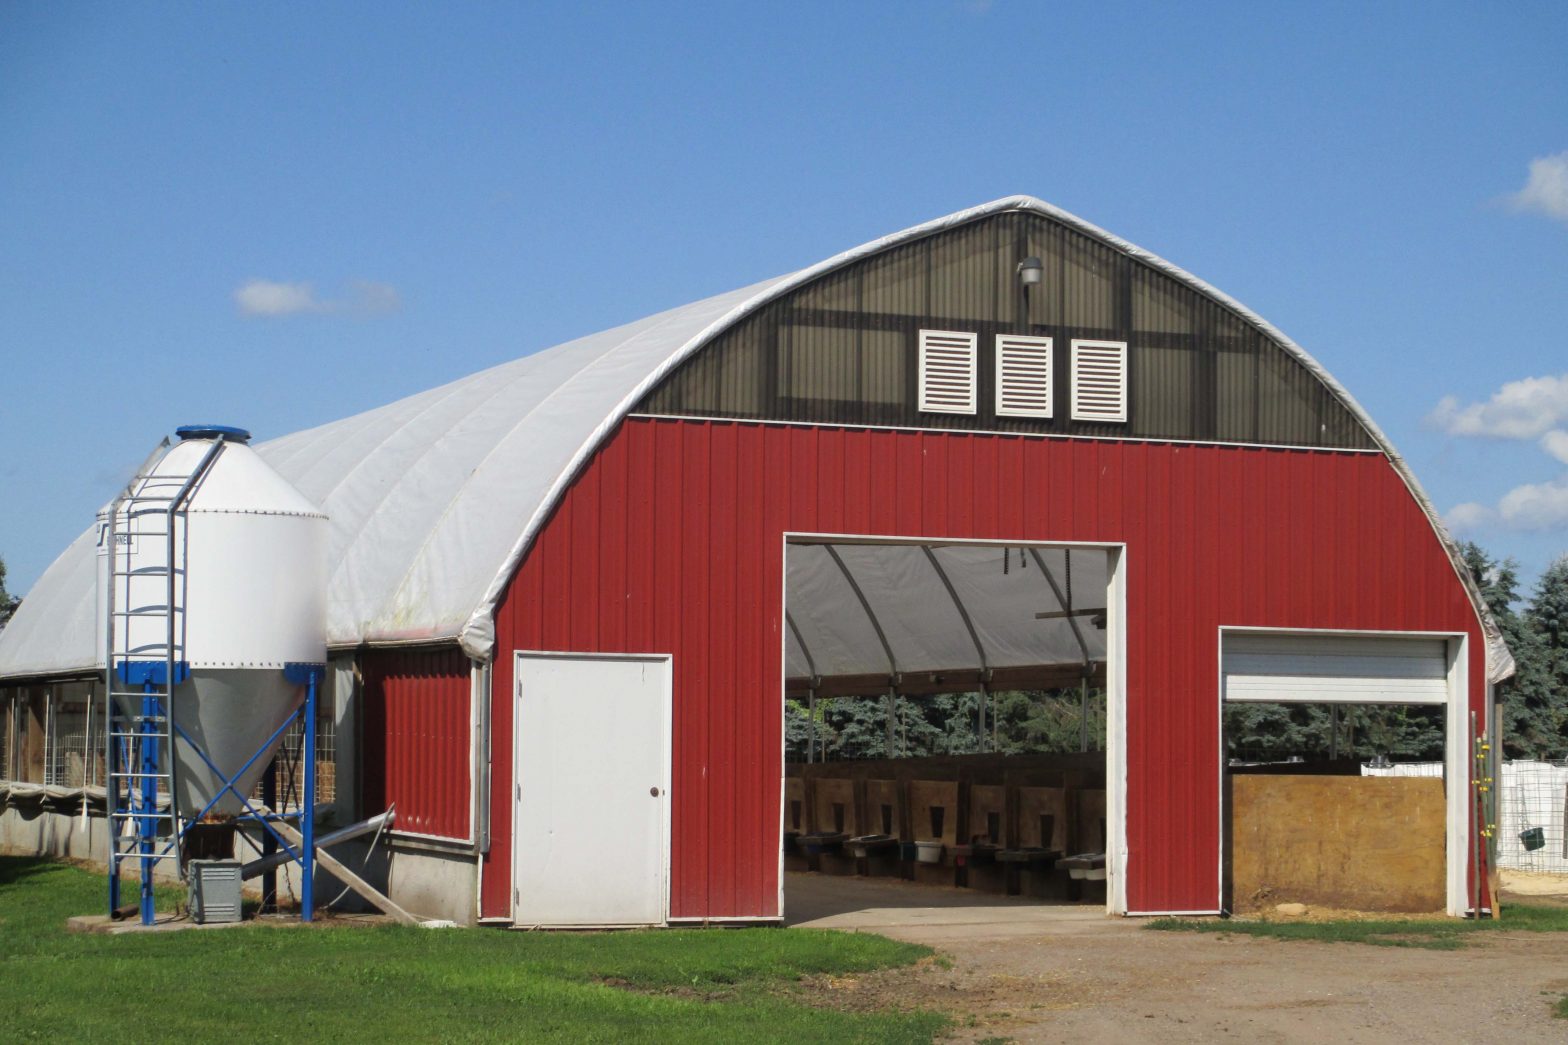 BLT Dairy is a third-generation, 180-cow farm owned and operated by Brad and Laura Friesen in Barron, Wisconsin.